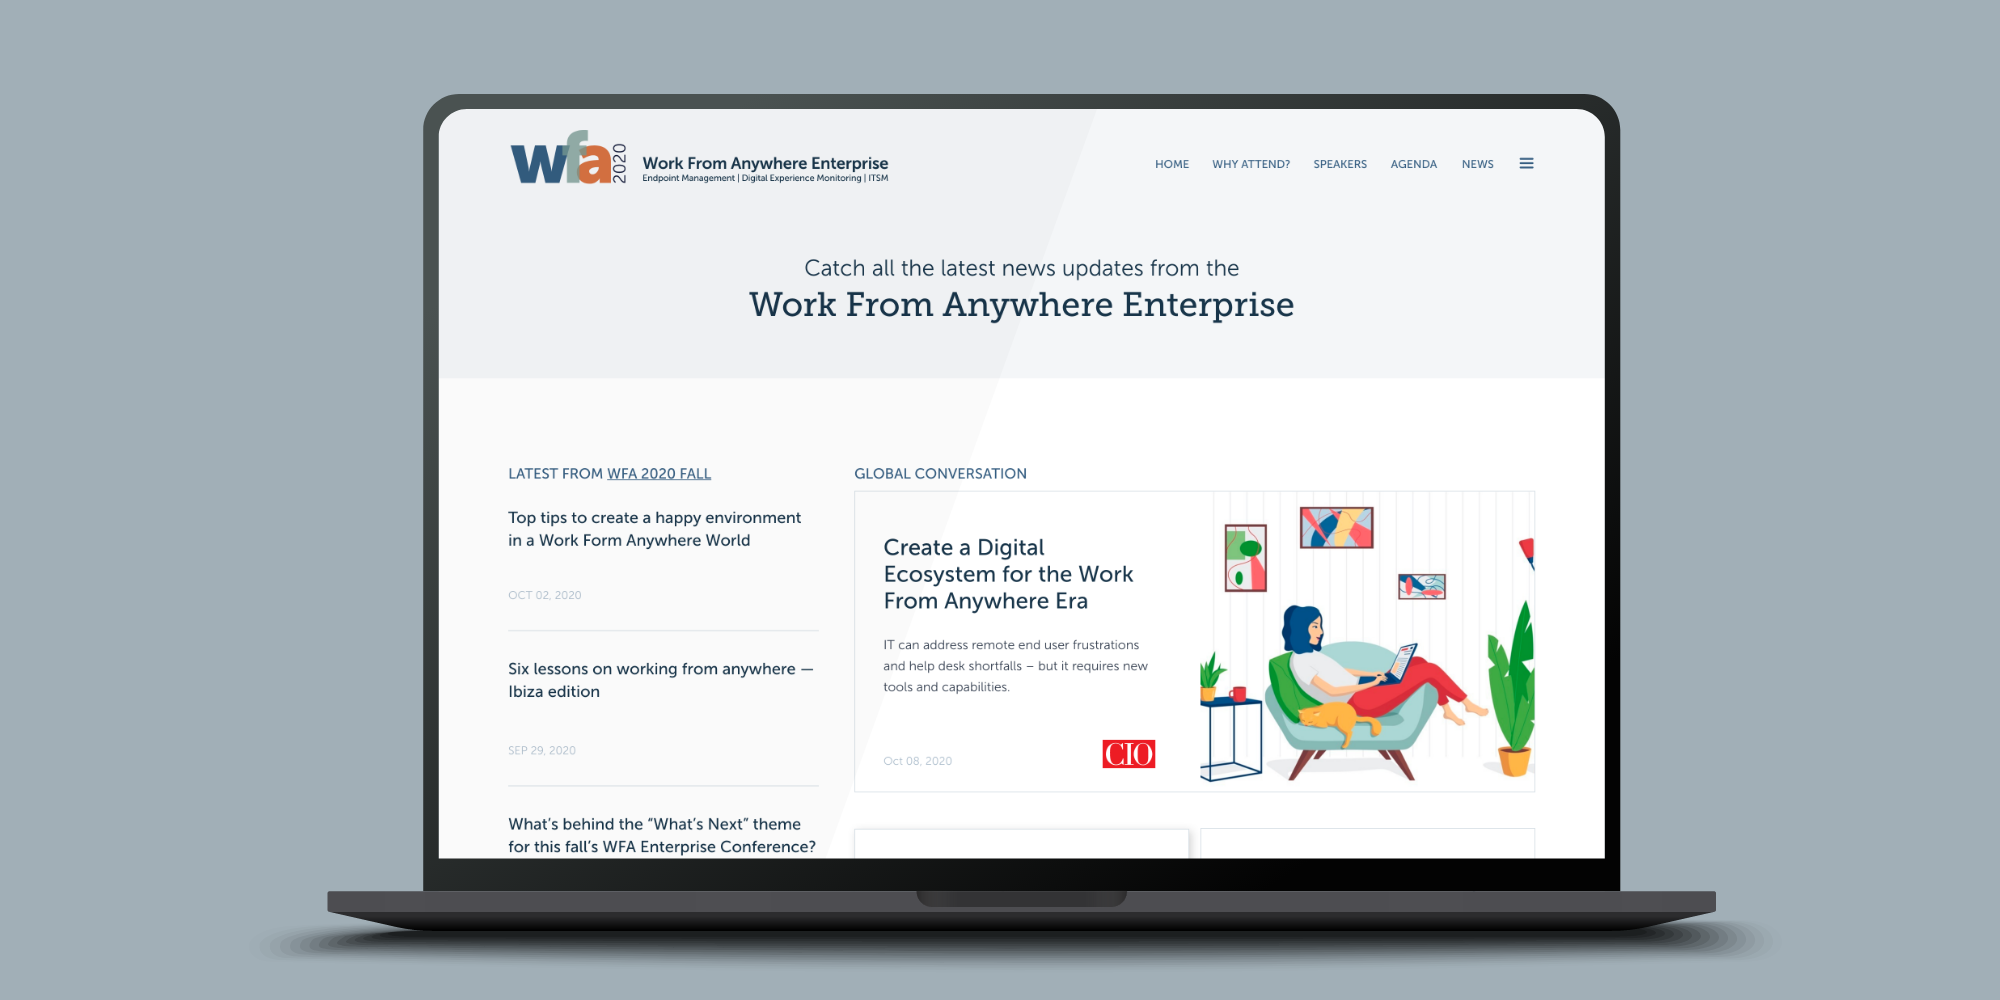 News Roundup: All you need to know about Work From Anywhere